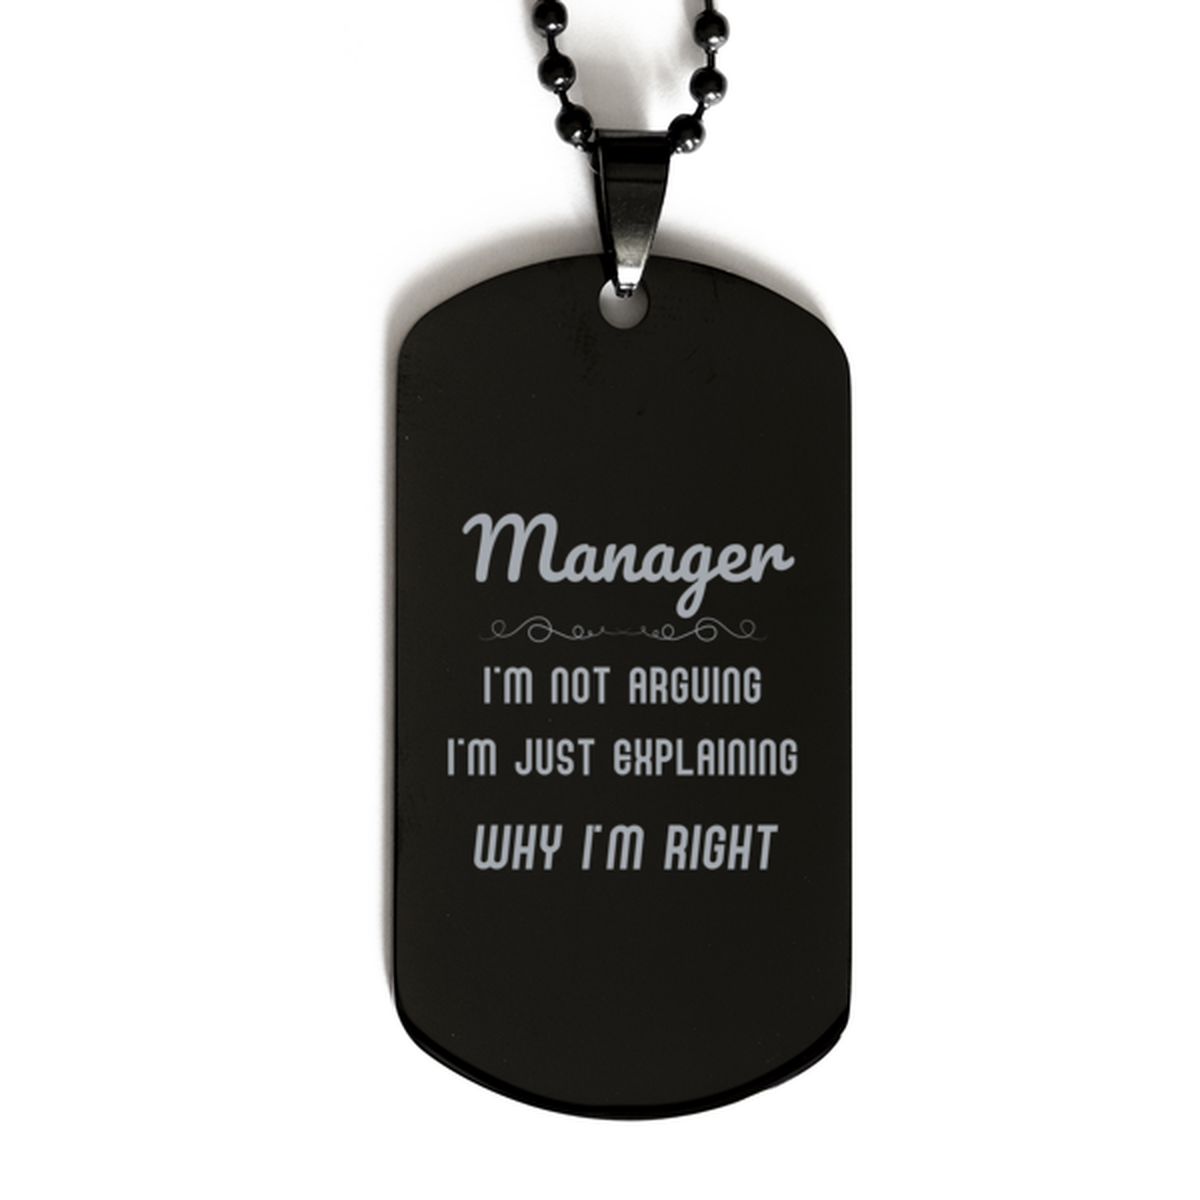 Manager I'm not Arguing. I'm Just Explaining Why I'm RIGHT Black Dog Tag, Funny Saying Quote Manager Gifts For Manager Graduation Birthday Christmas Gifts for Men Women Coworker